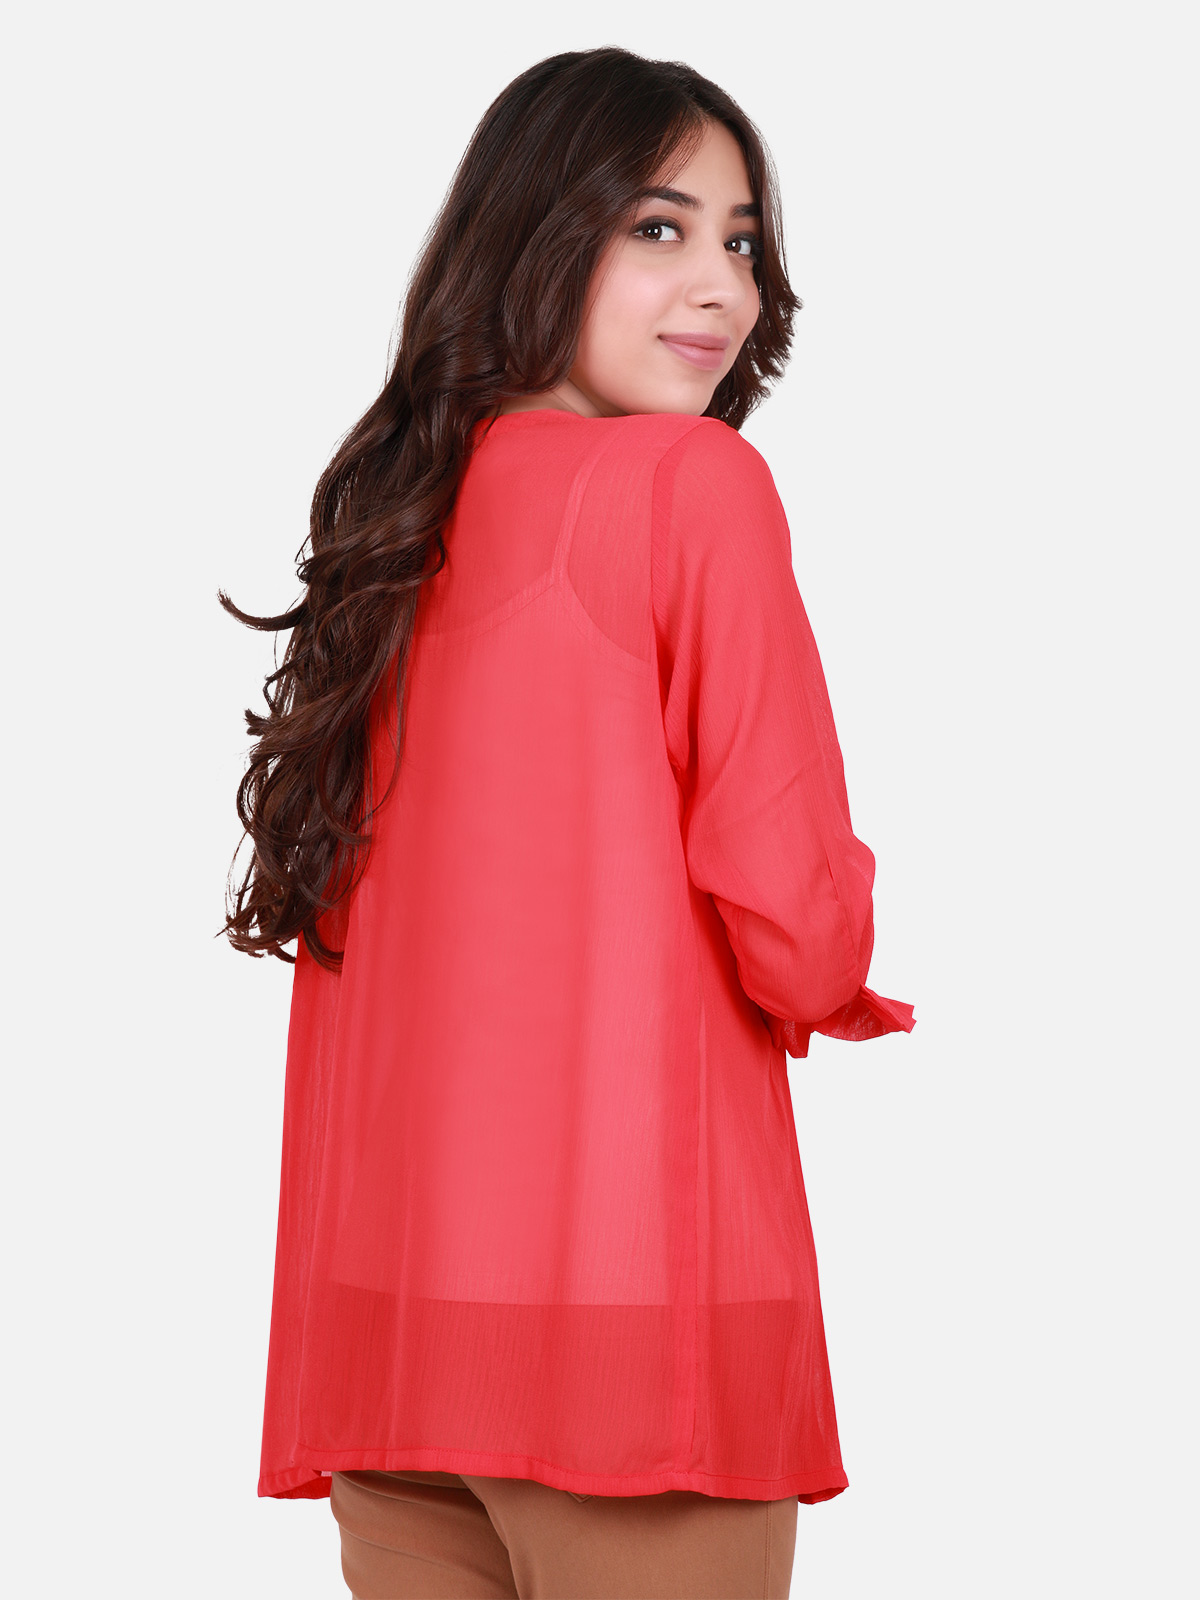 Red pret wear short top by Eden Robe western tops collection 2019